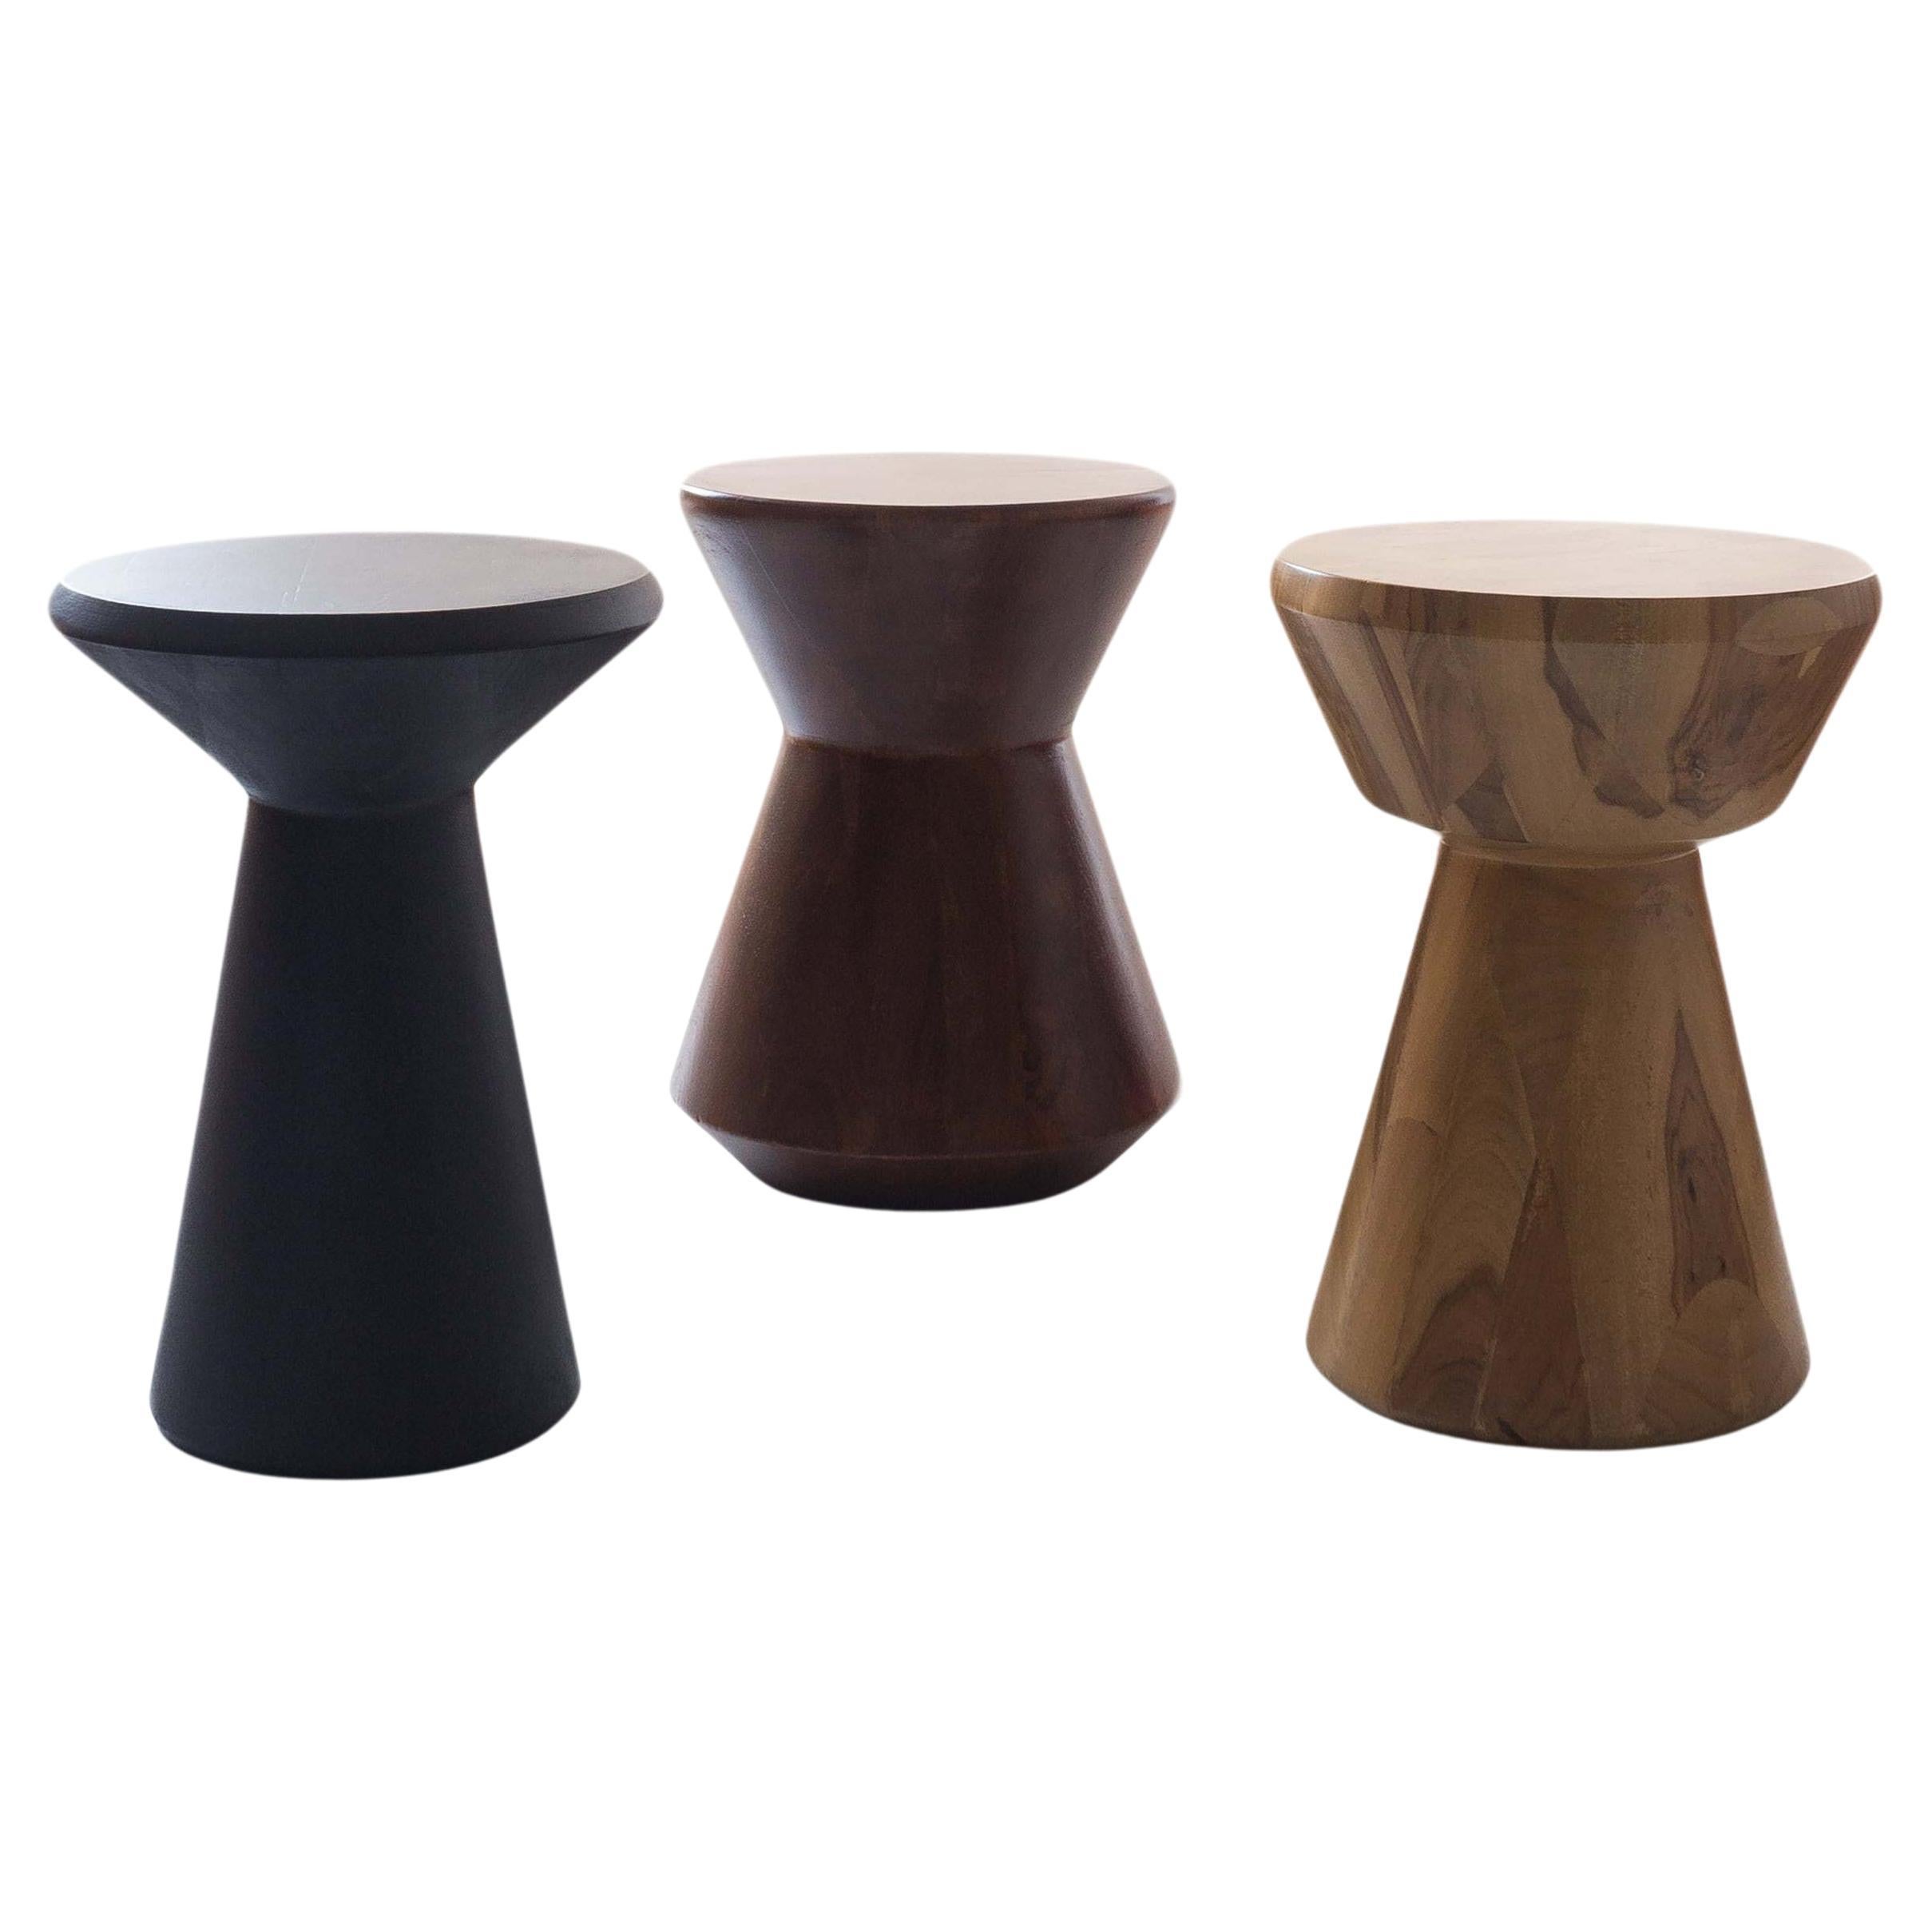 Set of 3 Stools by Camilo Andres Rodriguez Marquez